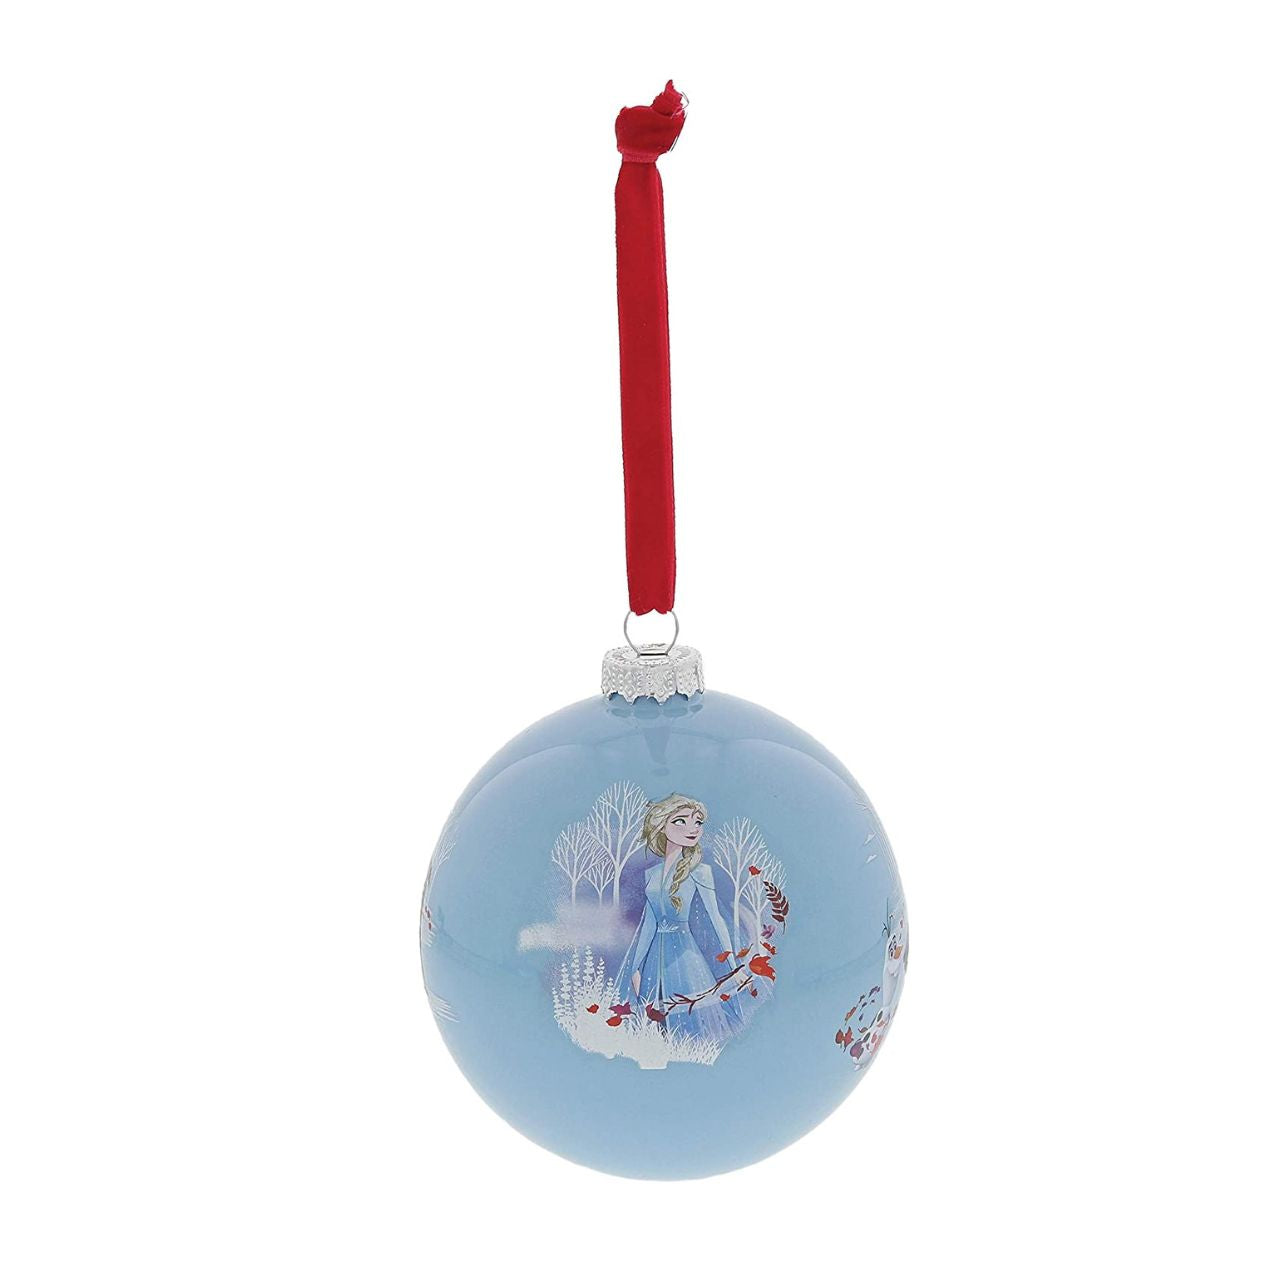 Disney Christmas Bauble Frozen Seek the Truth  Elsa and Anna are joined by the lovable Olaf in their next adventure in this icy blue glass bauble. This Frozen treasured keepsake would make a lovely unique gift for a friend, or a self-purchase to brighten up the home. Presented in a branded window box.